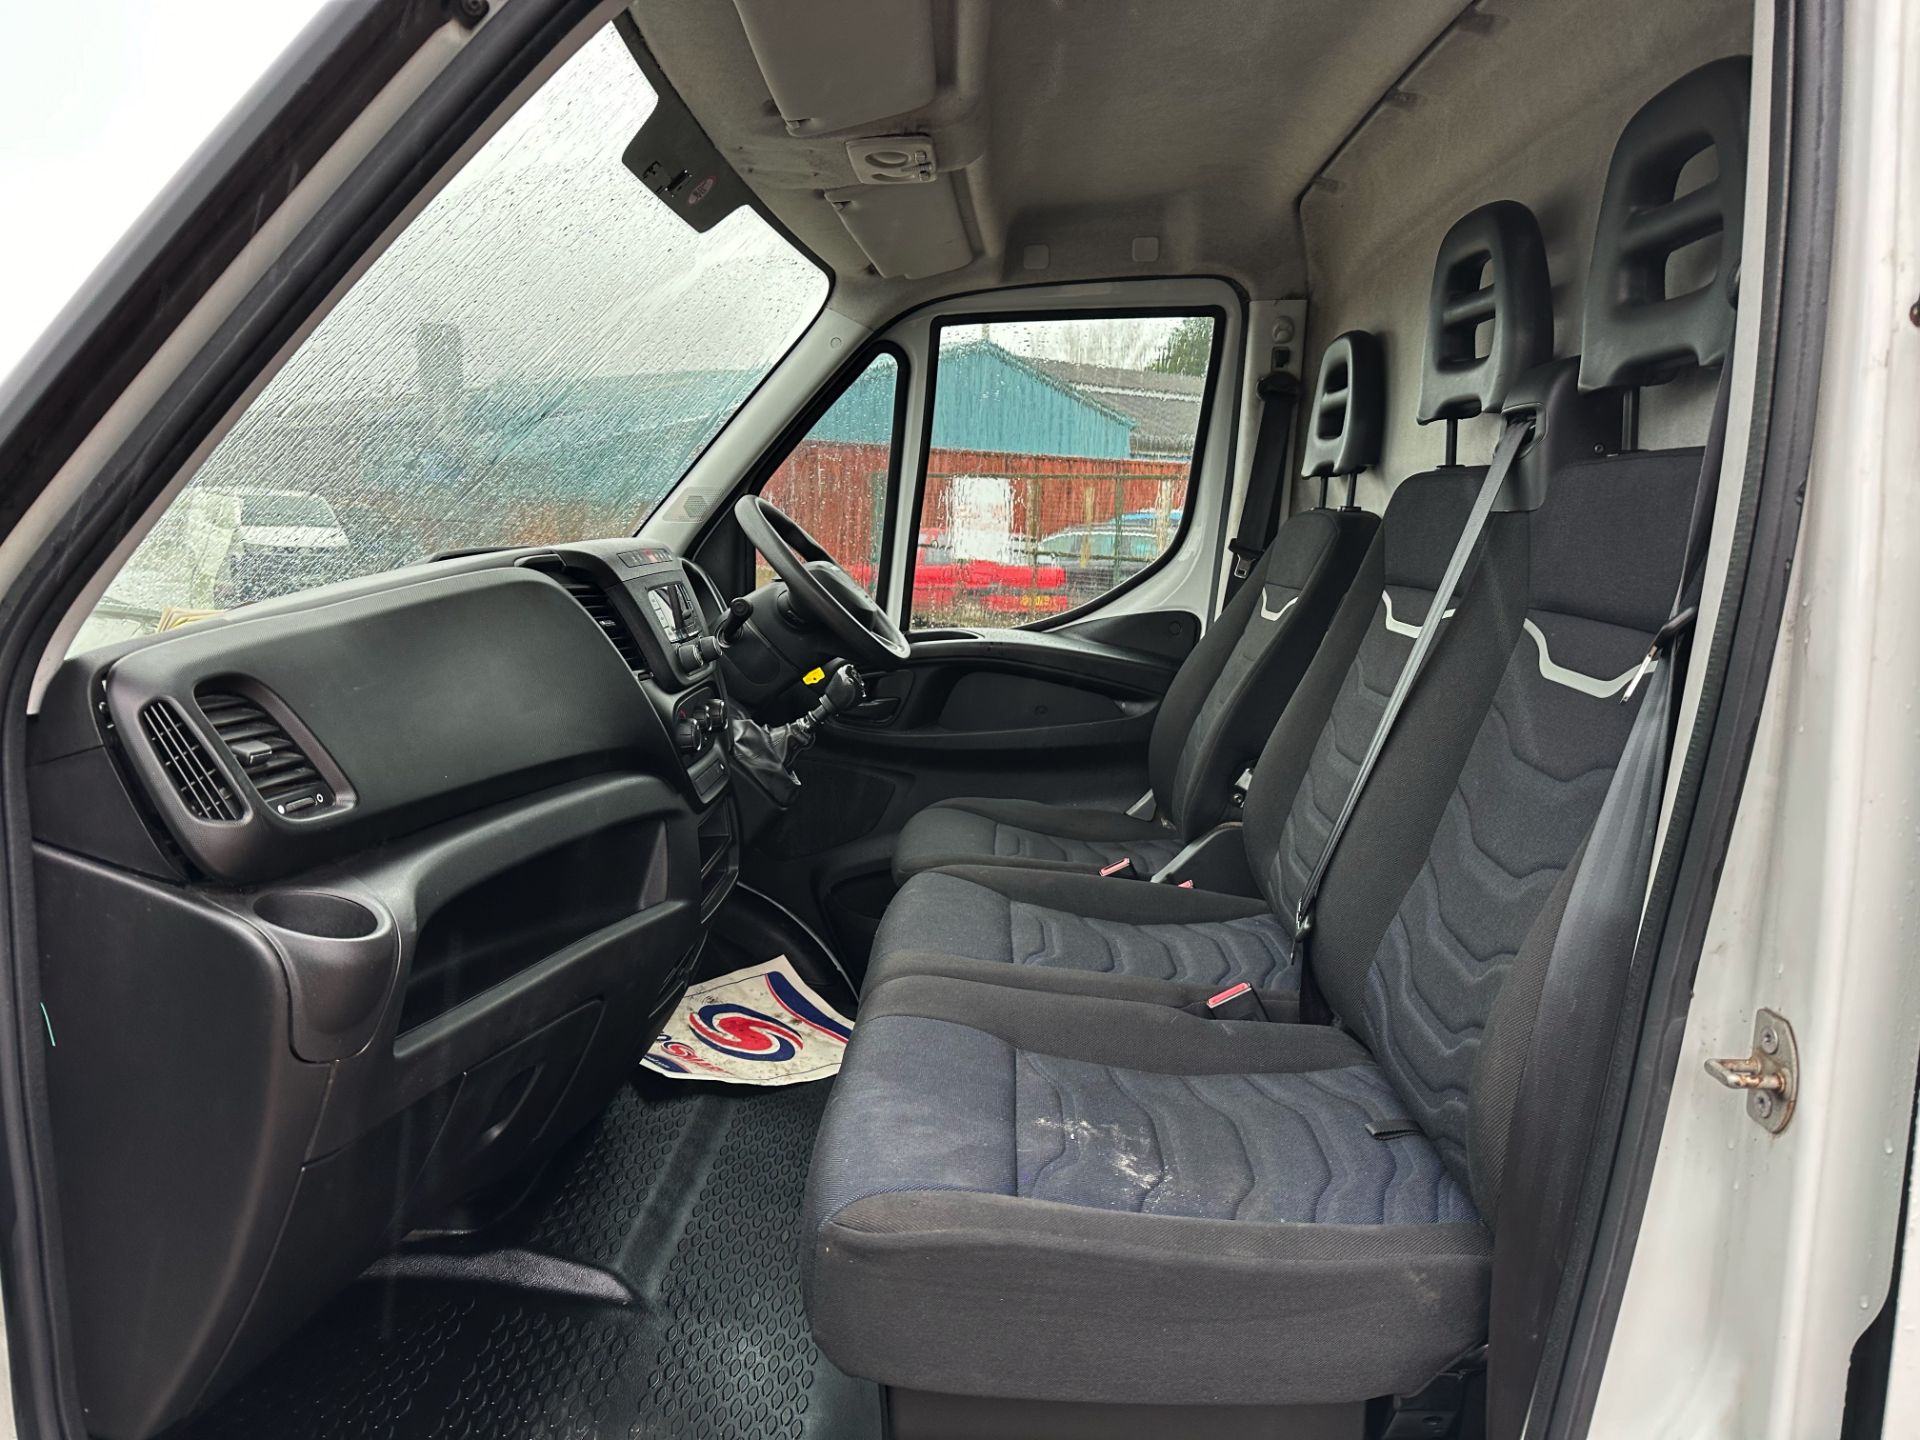 Iveco Daily 35-140 Long Wheel Base High Roof - 2021 Reg (New Shape) Only 85K Miles - Air Con - Look! - Image 14 of 27